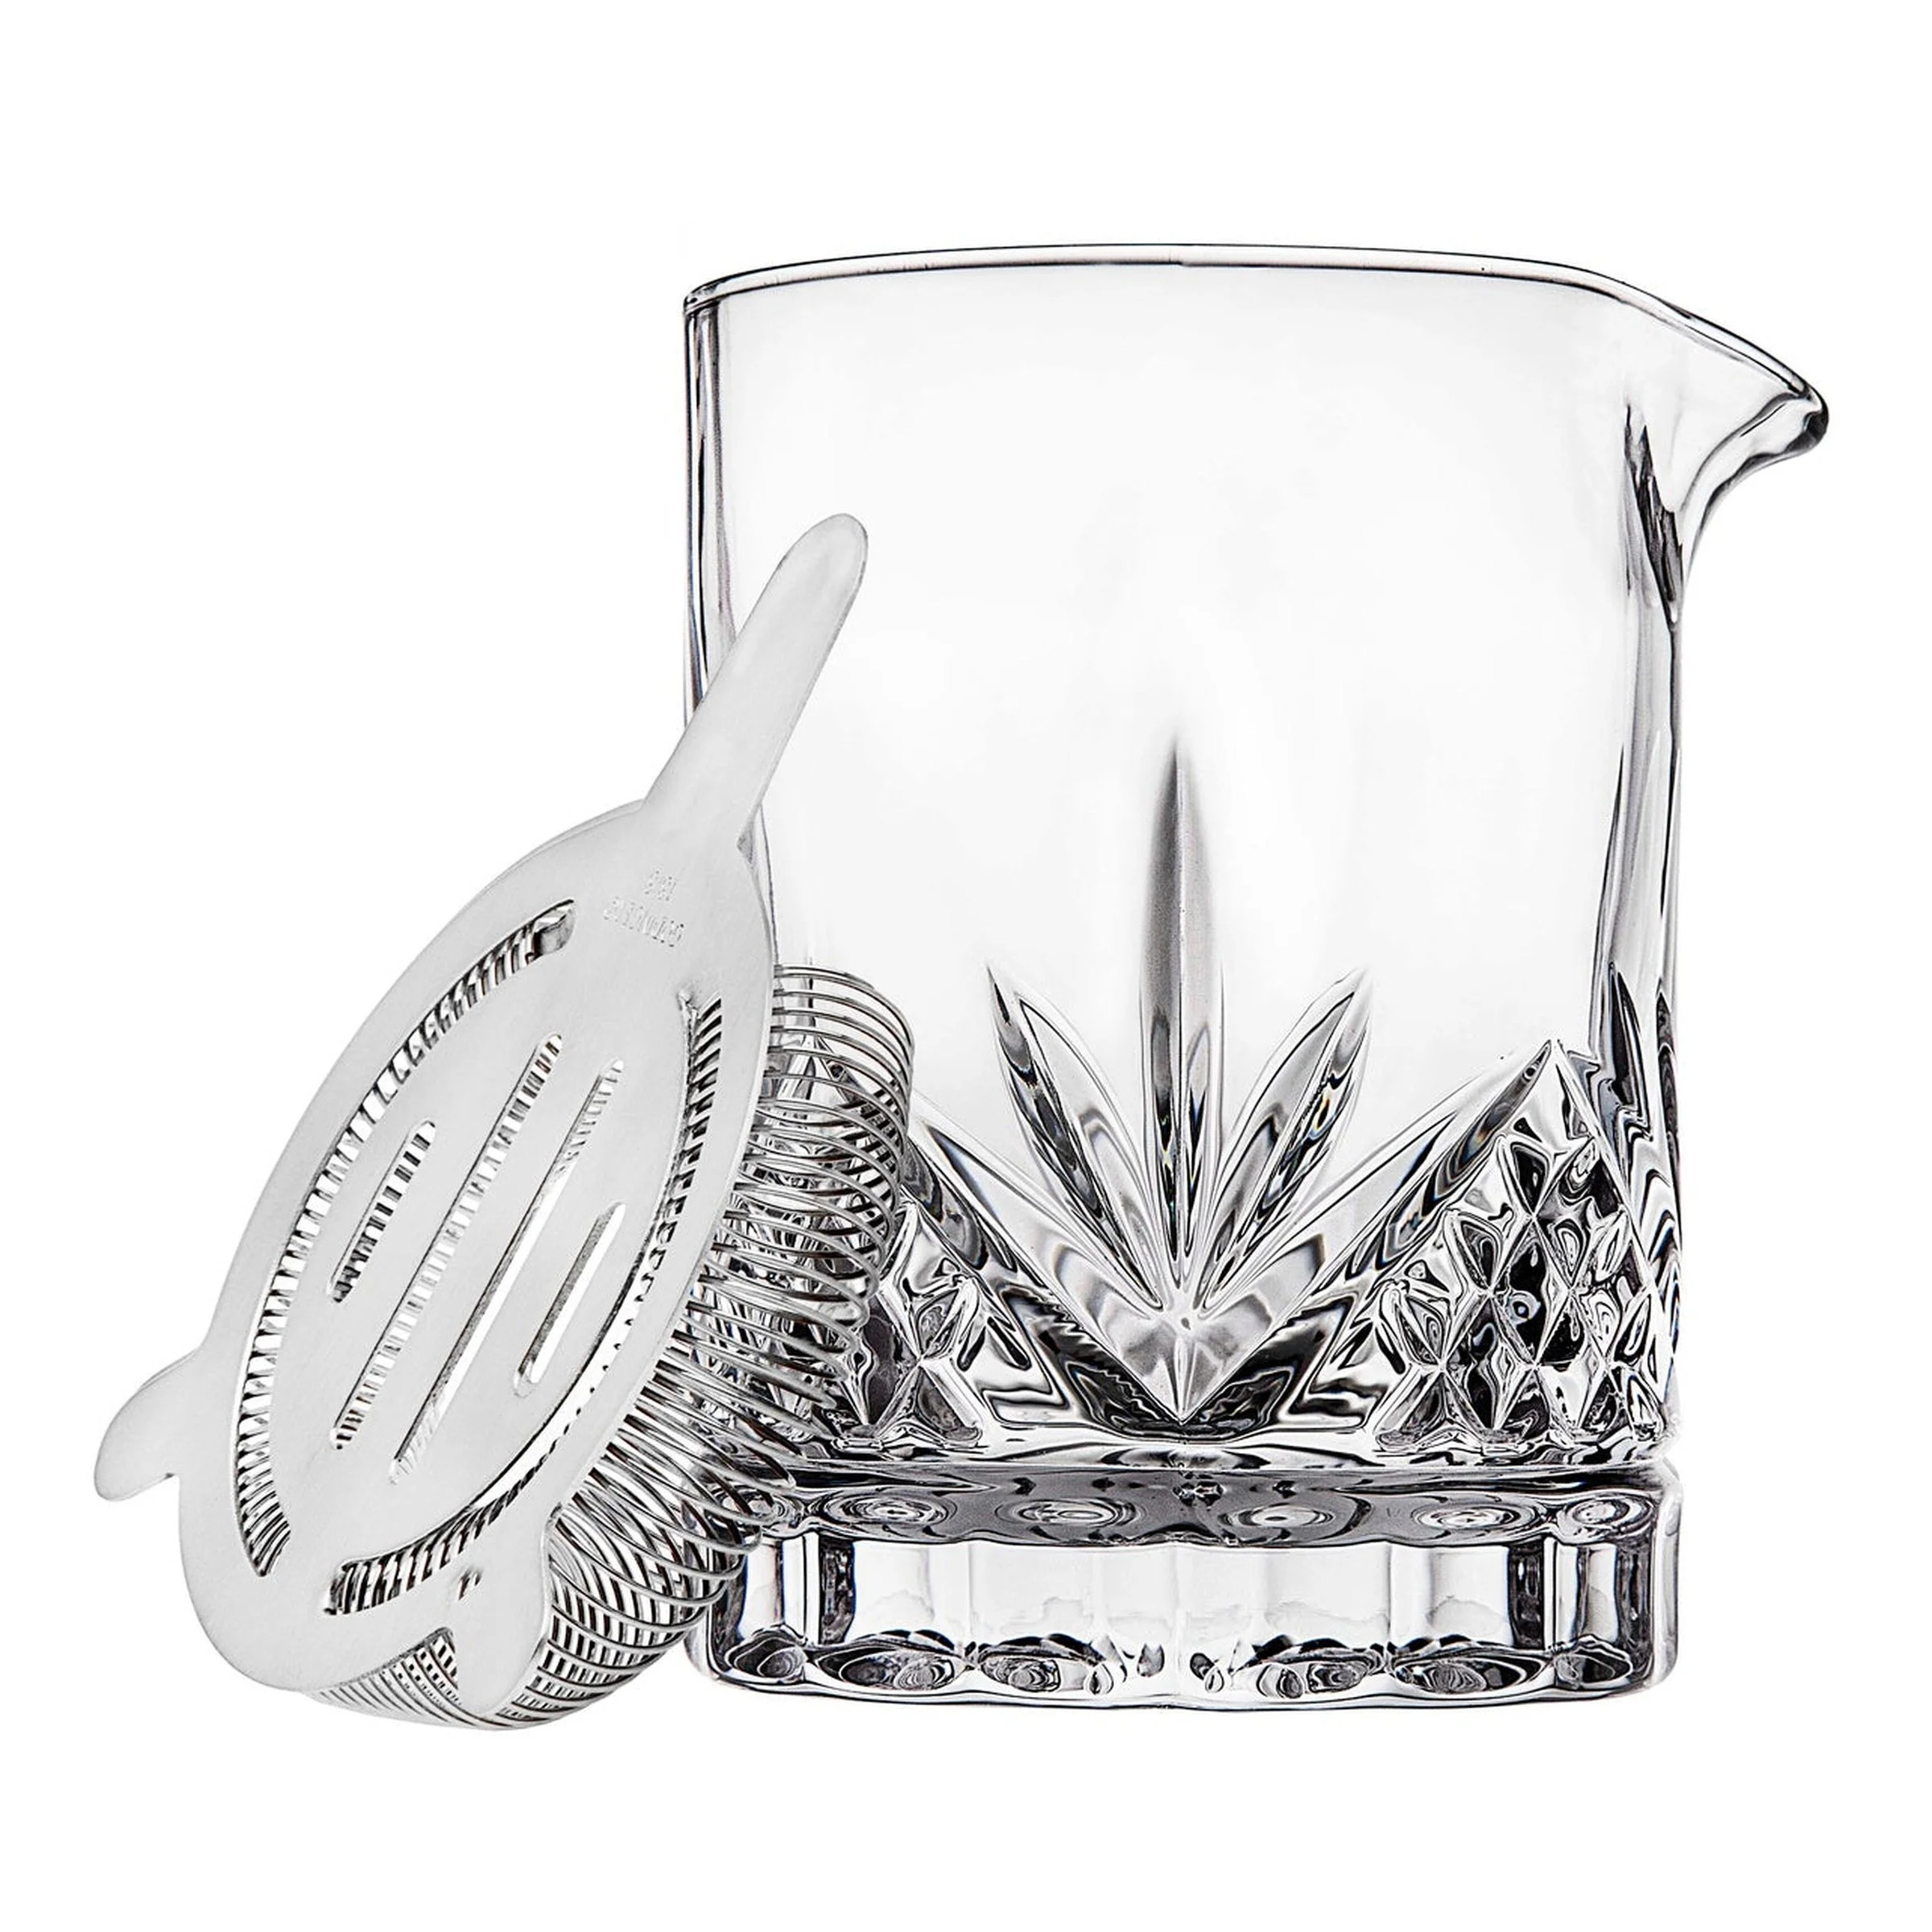 Dublin Crystal Cocktail Mixing Pitcher - image 1 of 2